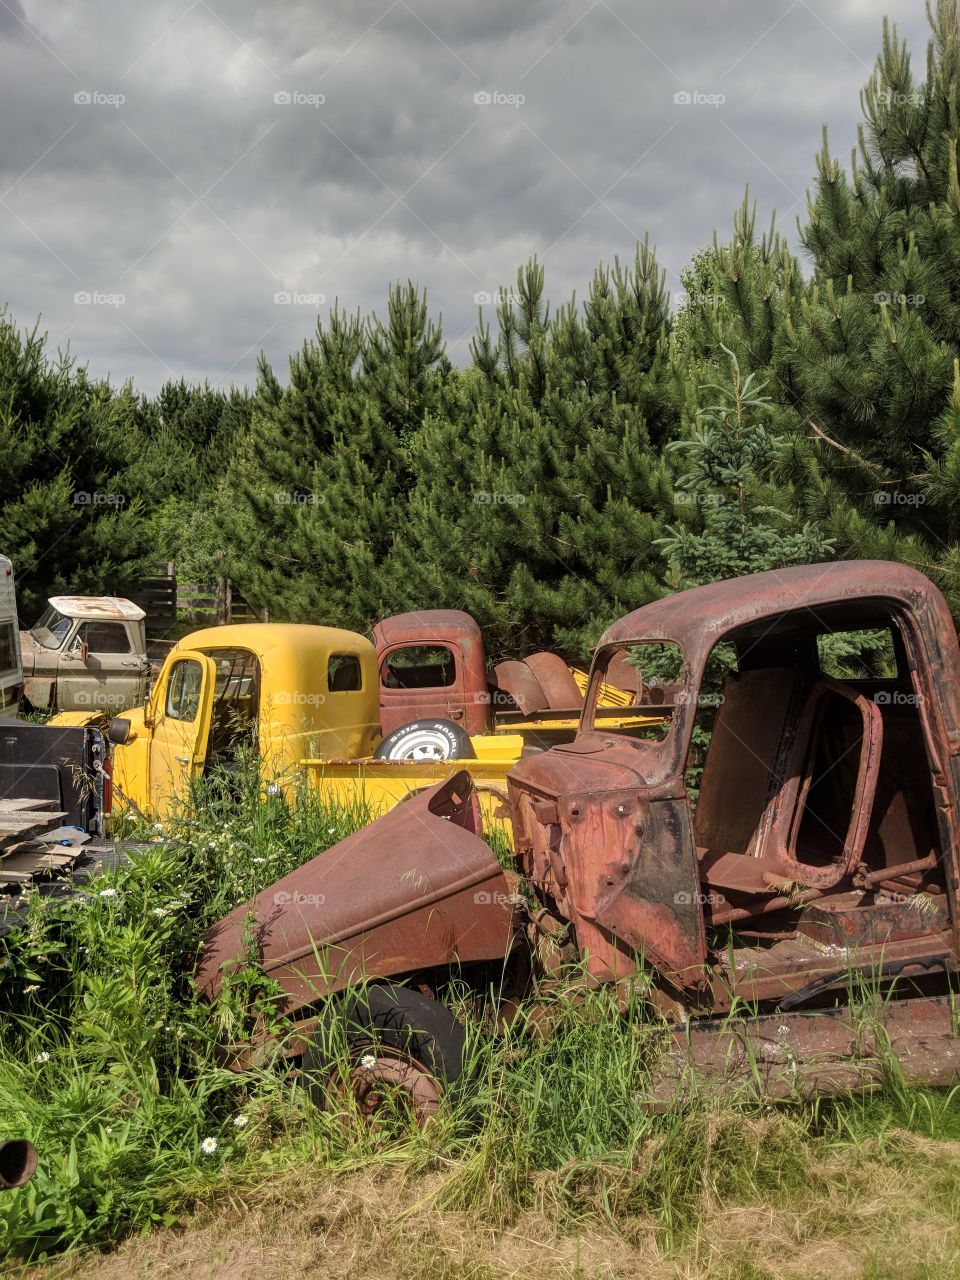 junk, rust, yellow, cool, potential, trucks, old, hot rod, rat rod, refinish, build, Ford, Plymouth, Chevrolet